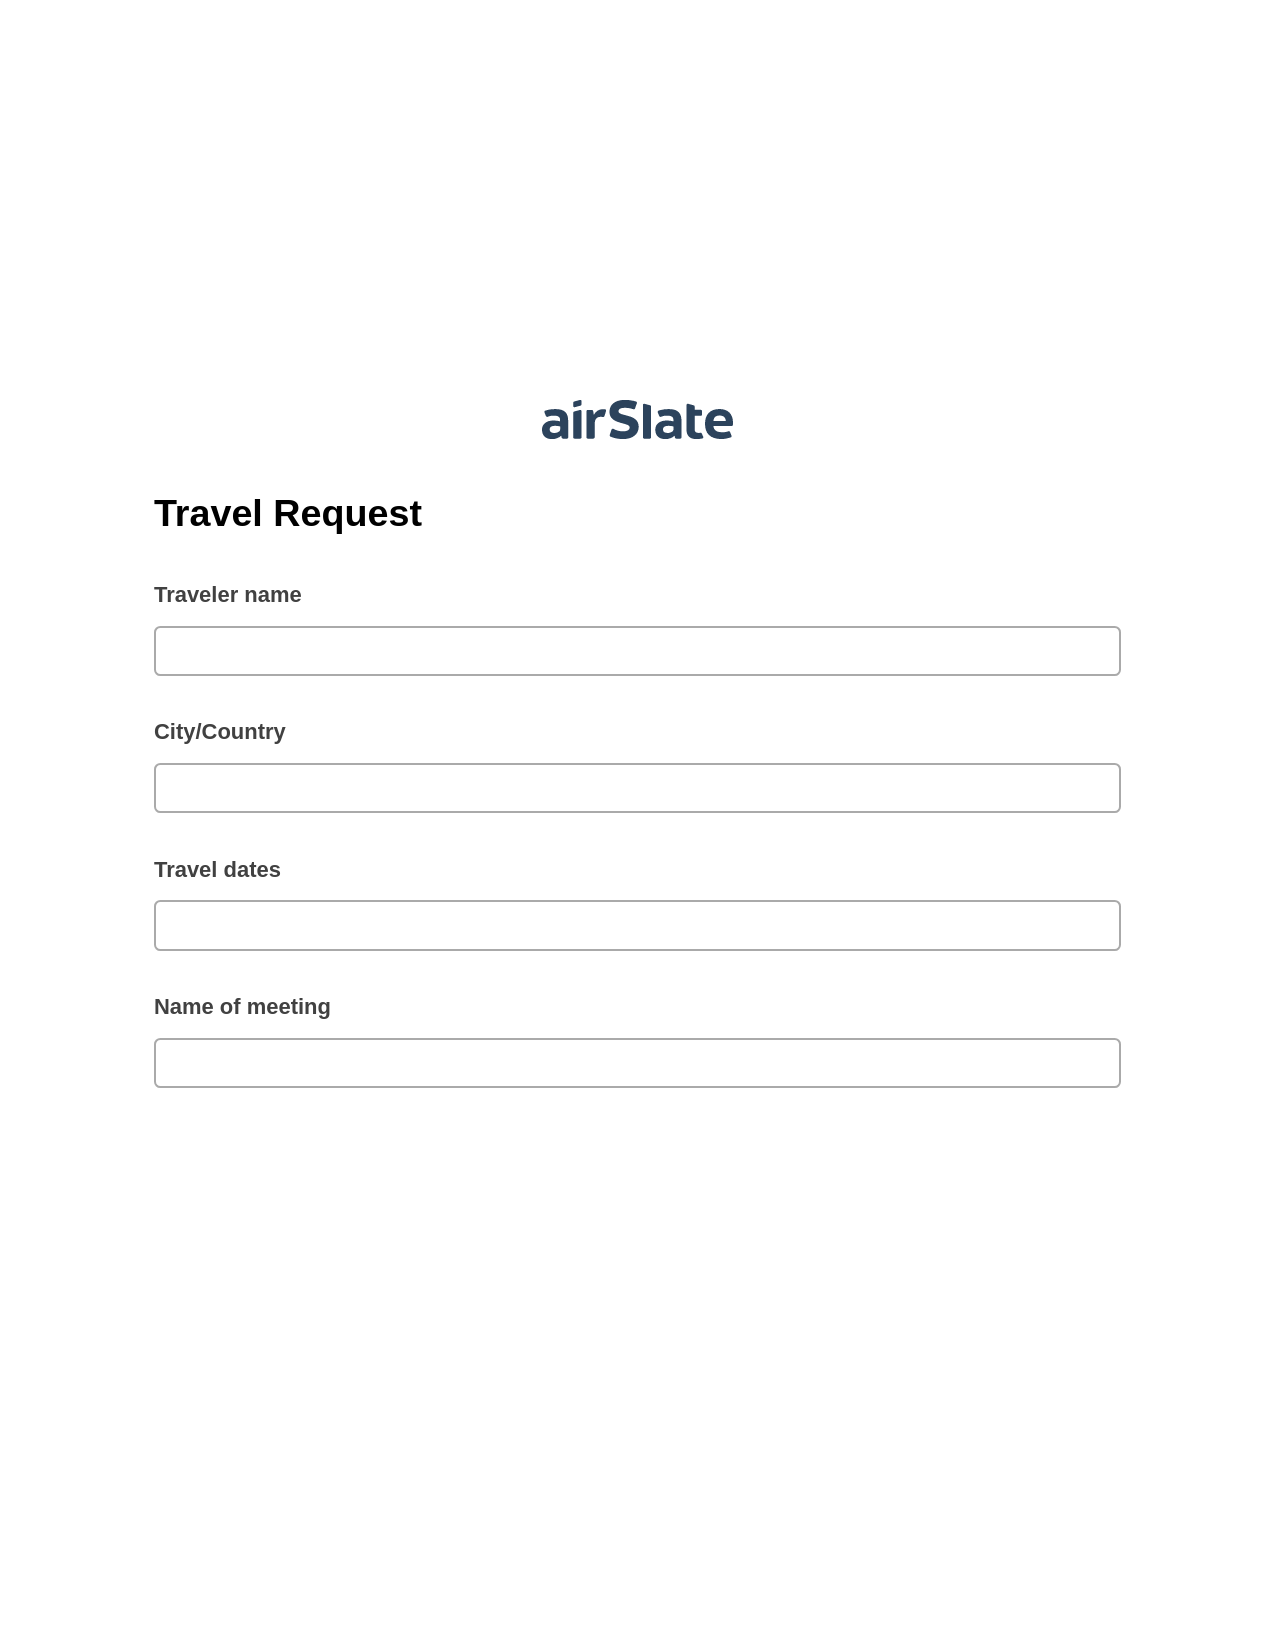 Travel Request Pre-fill from Excel Spreadsheet Bot, Create slate addon, Export to Excel 365 Bot